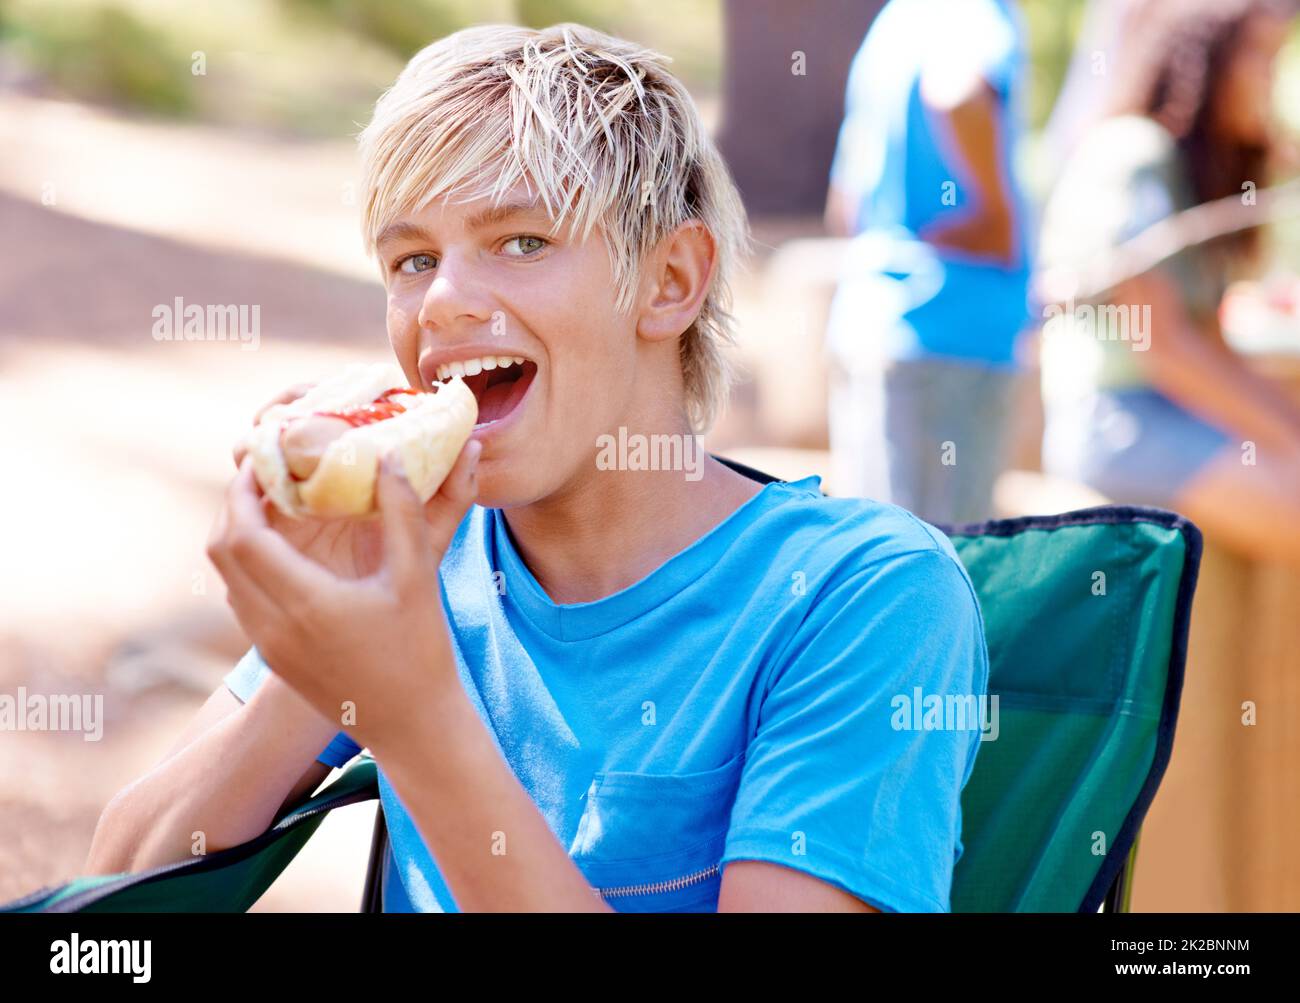 Hot dogs are my favorite. A cute little boy eating a hot dog while outdoors. Stock Photo